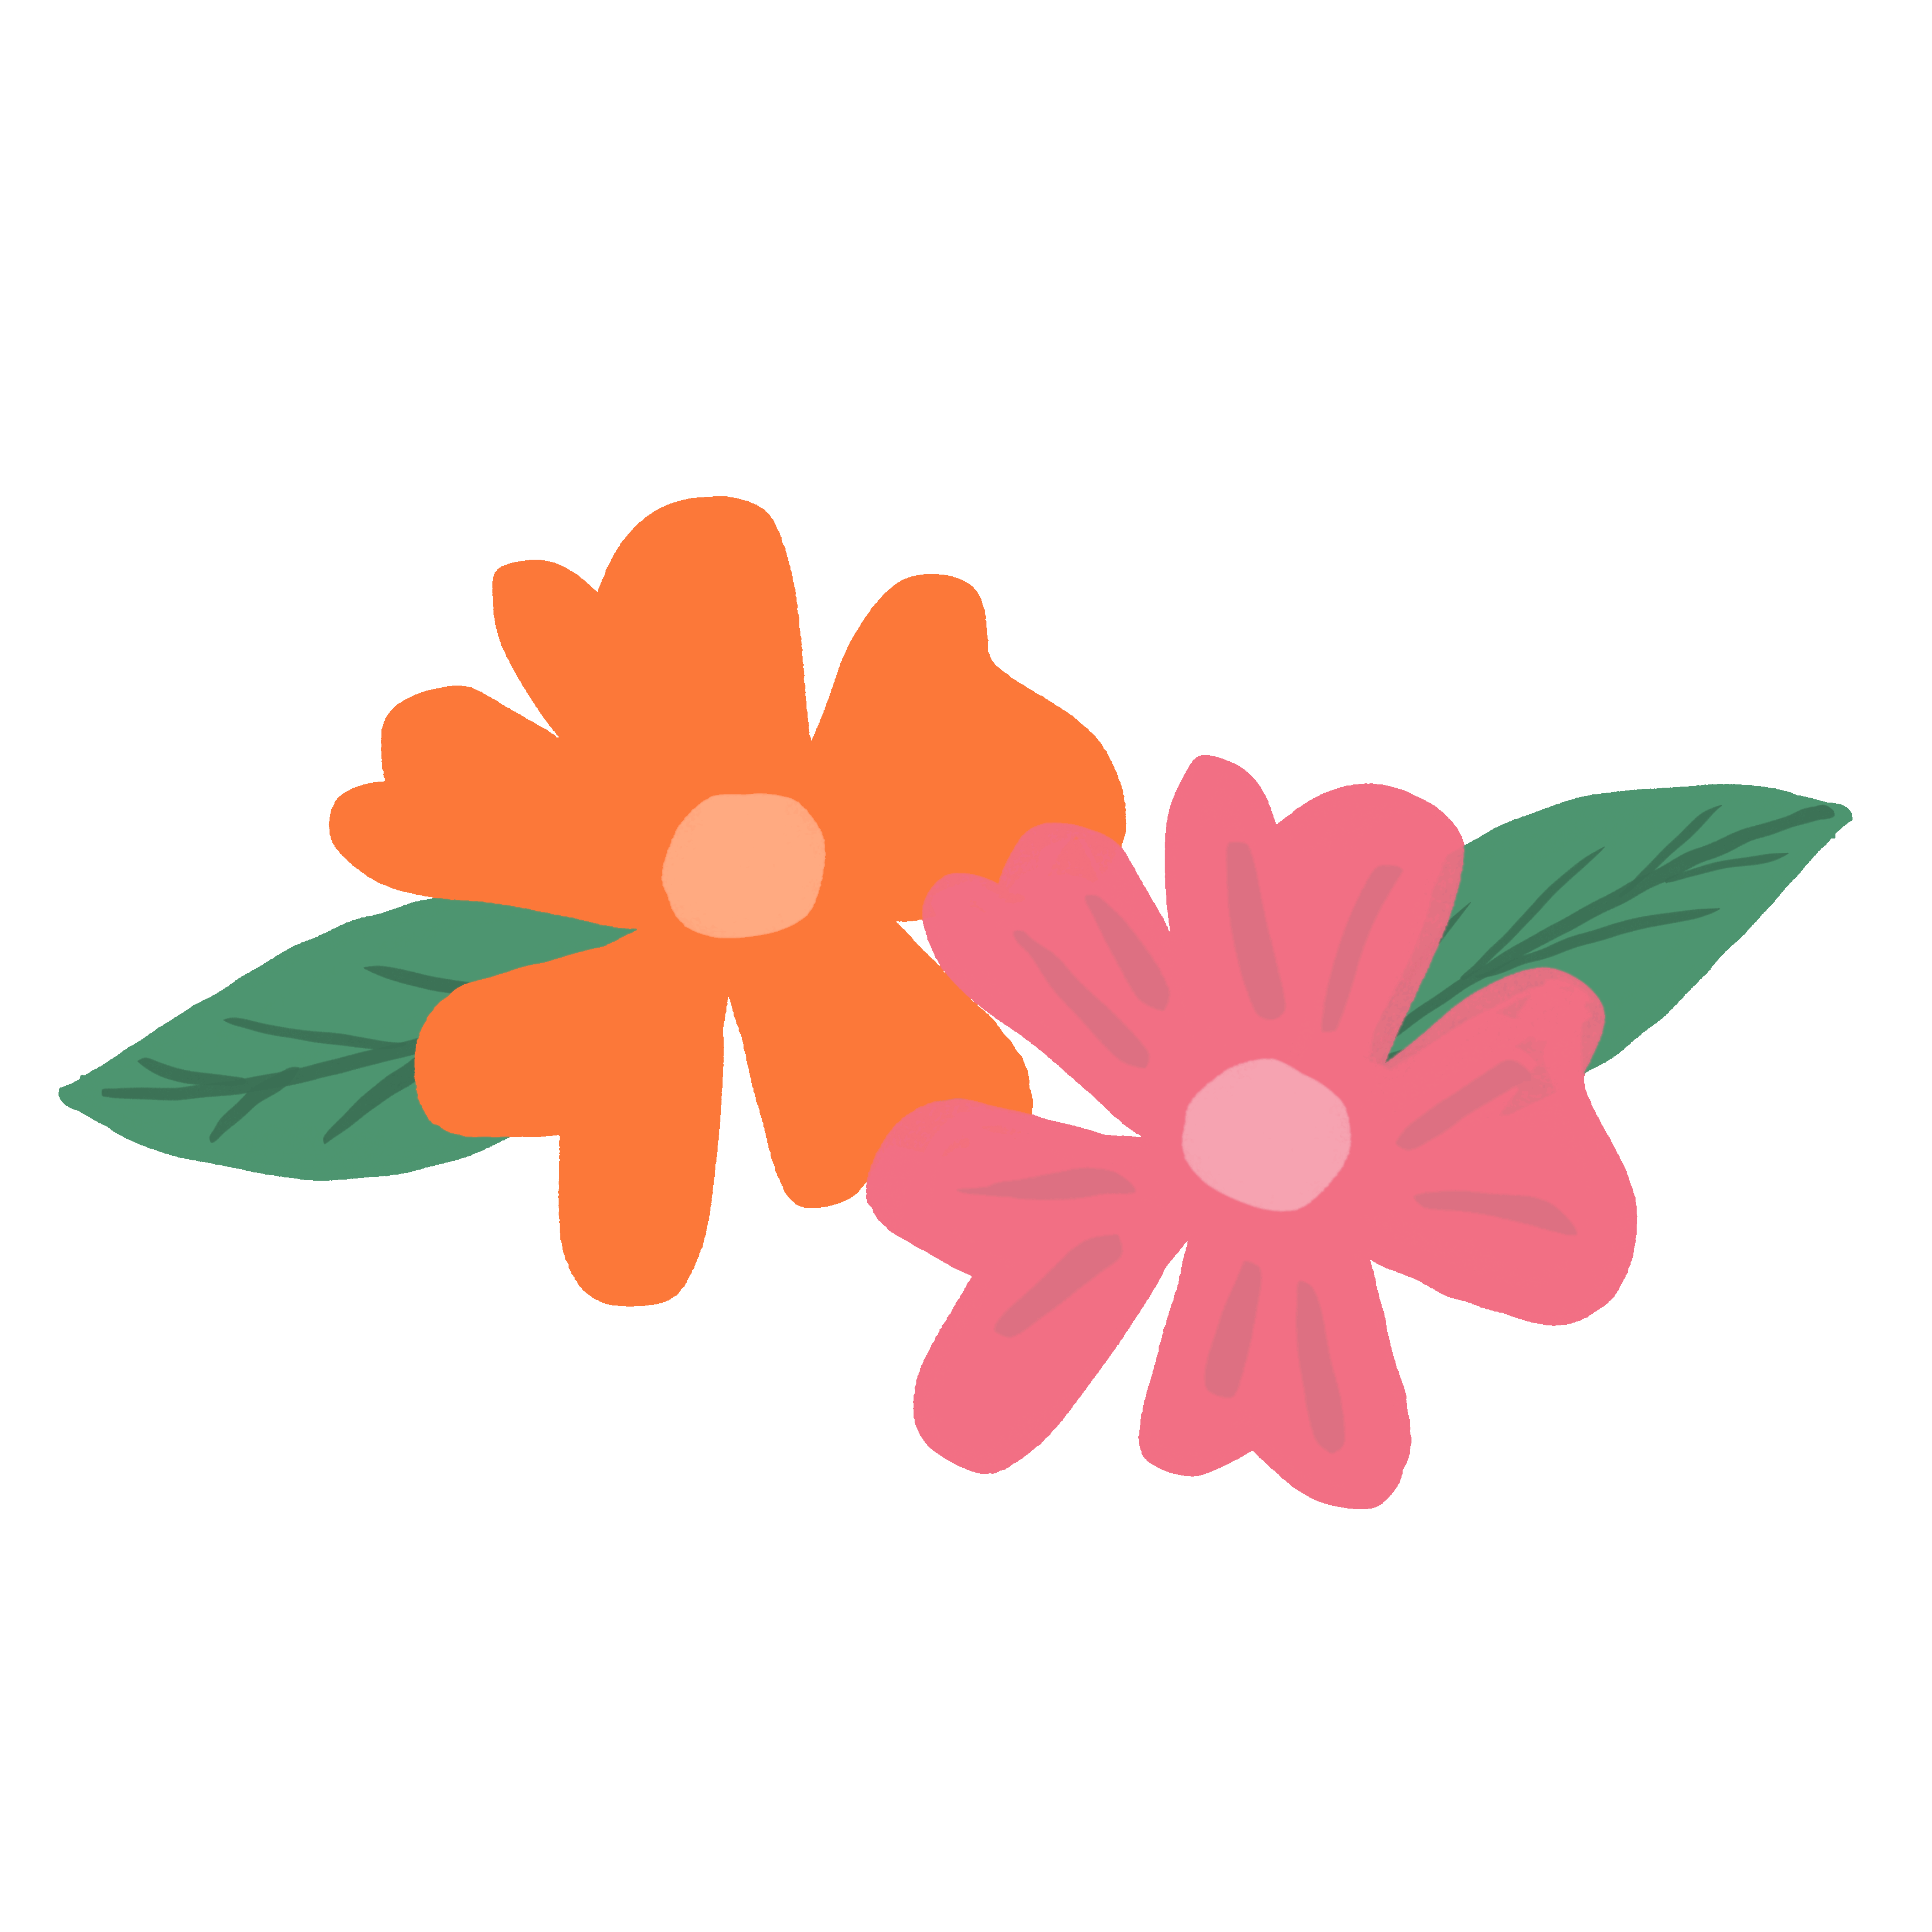 Flower Bunga Sticker for iOS & Android | GIPHY